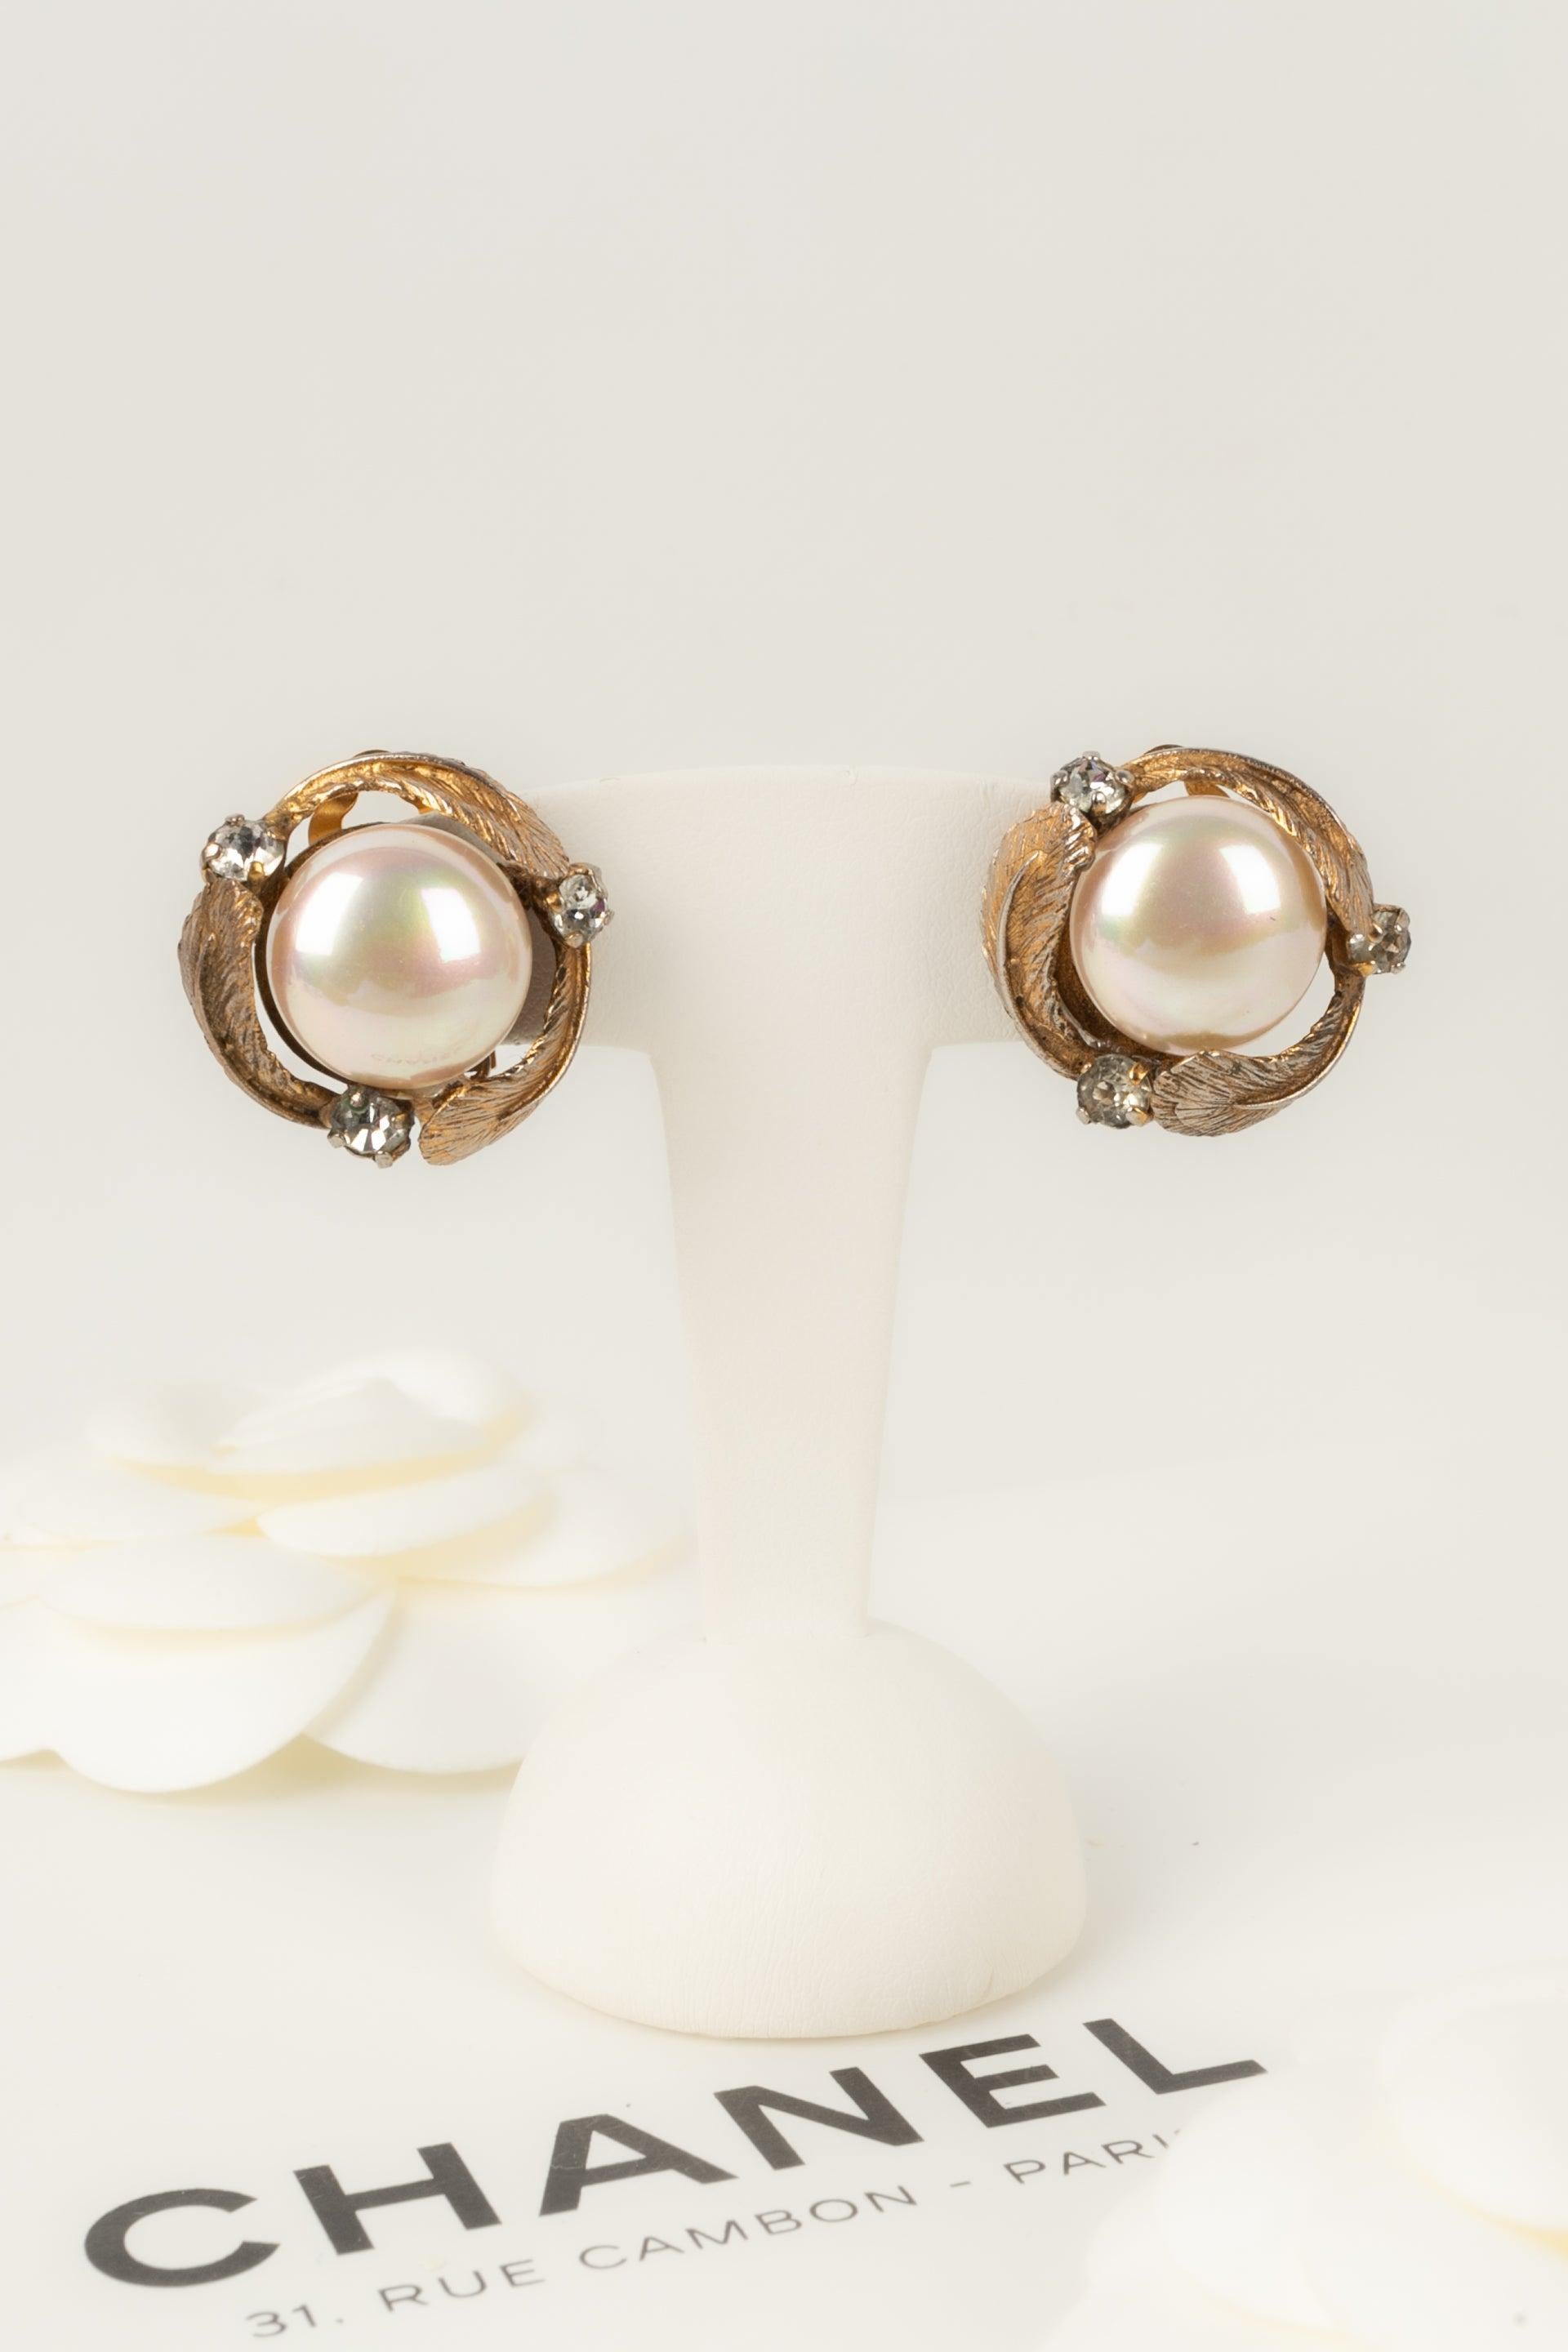 Chanel Golden Metal Earrings with Pearly Cabochons For Sale 3